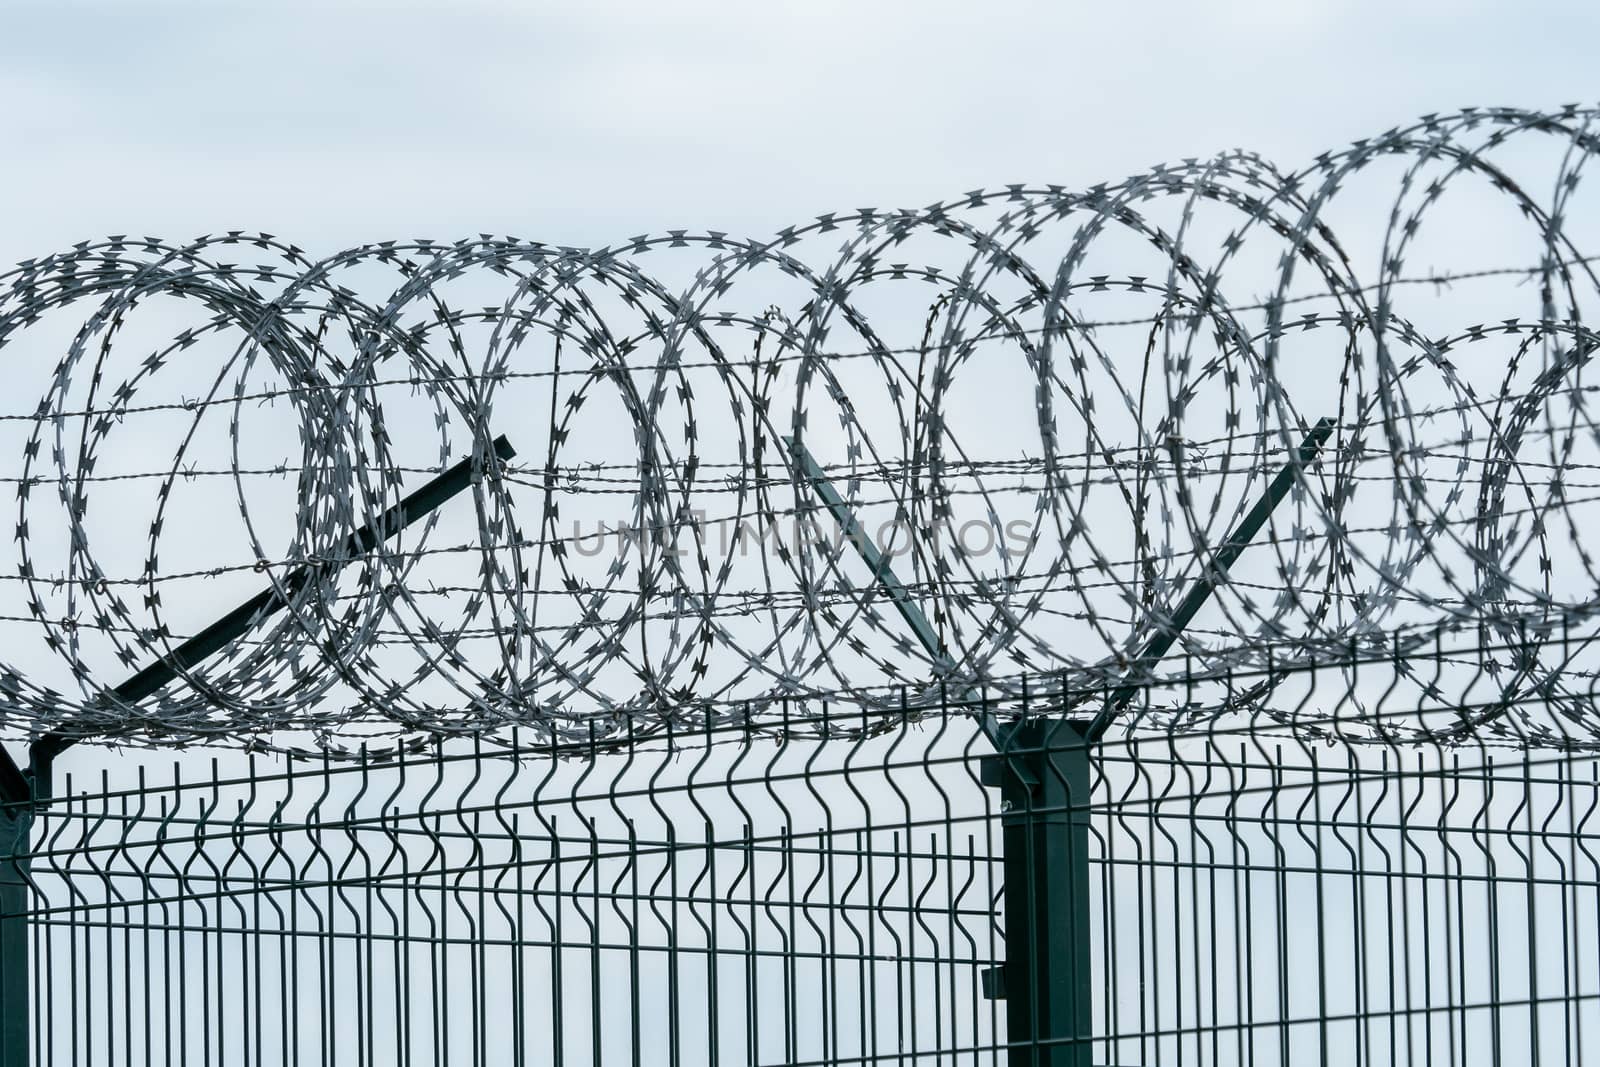 Security fence with a barbed wire. Fence with a barbed wire.